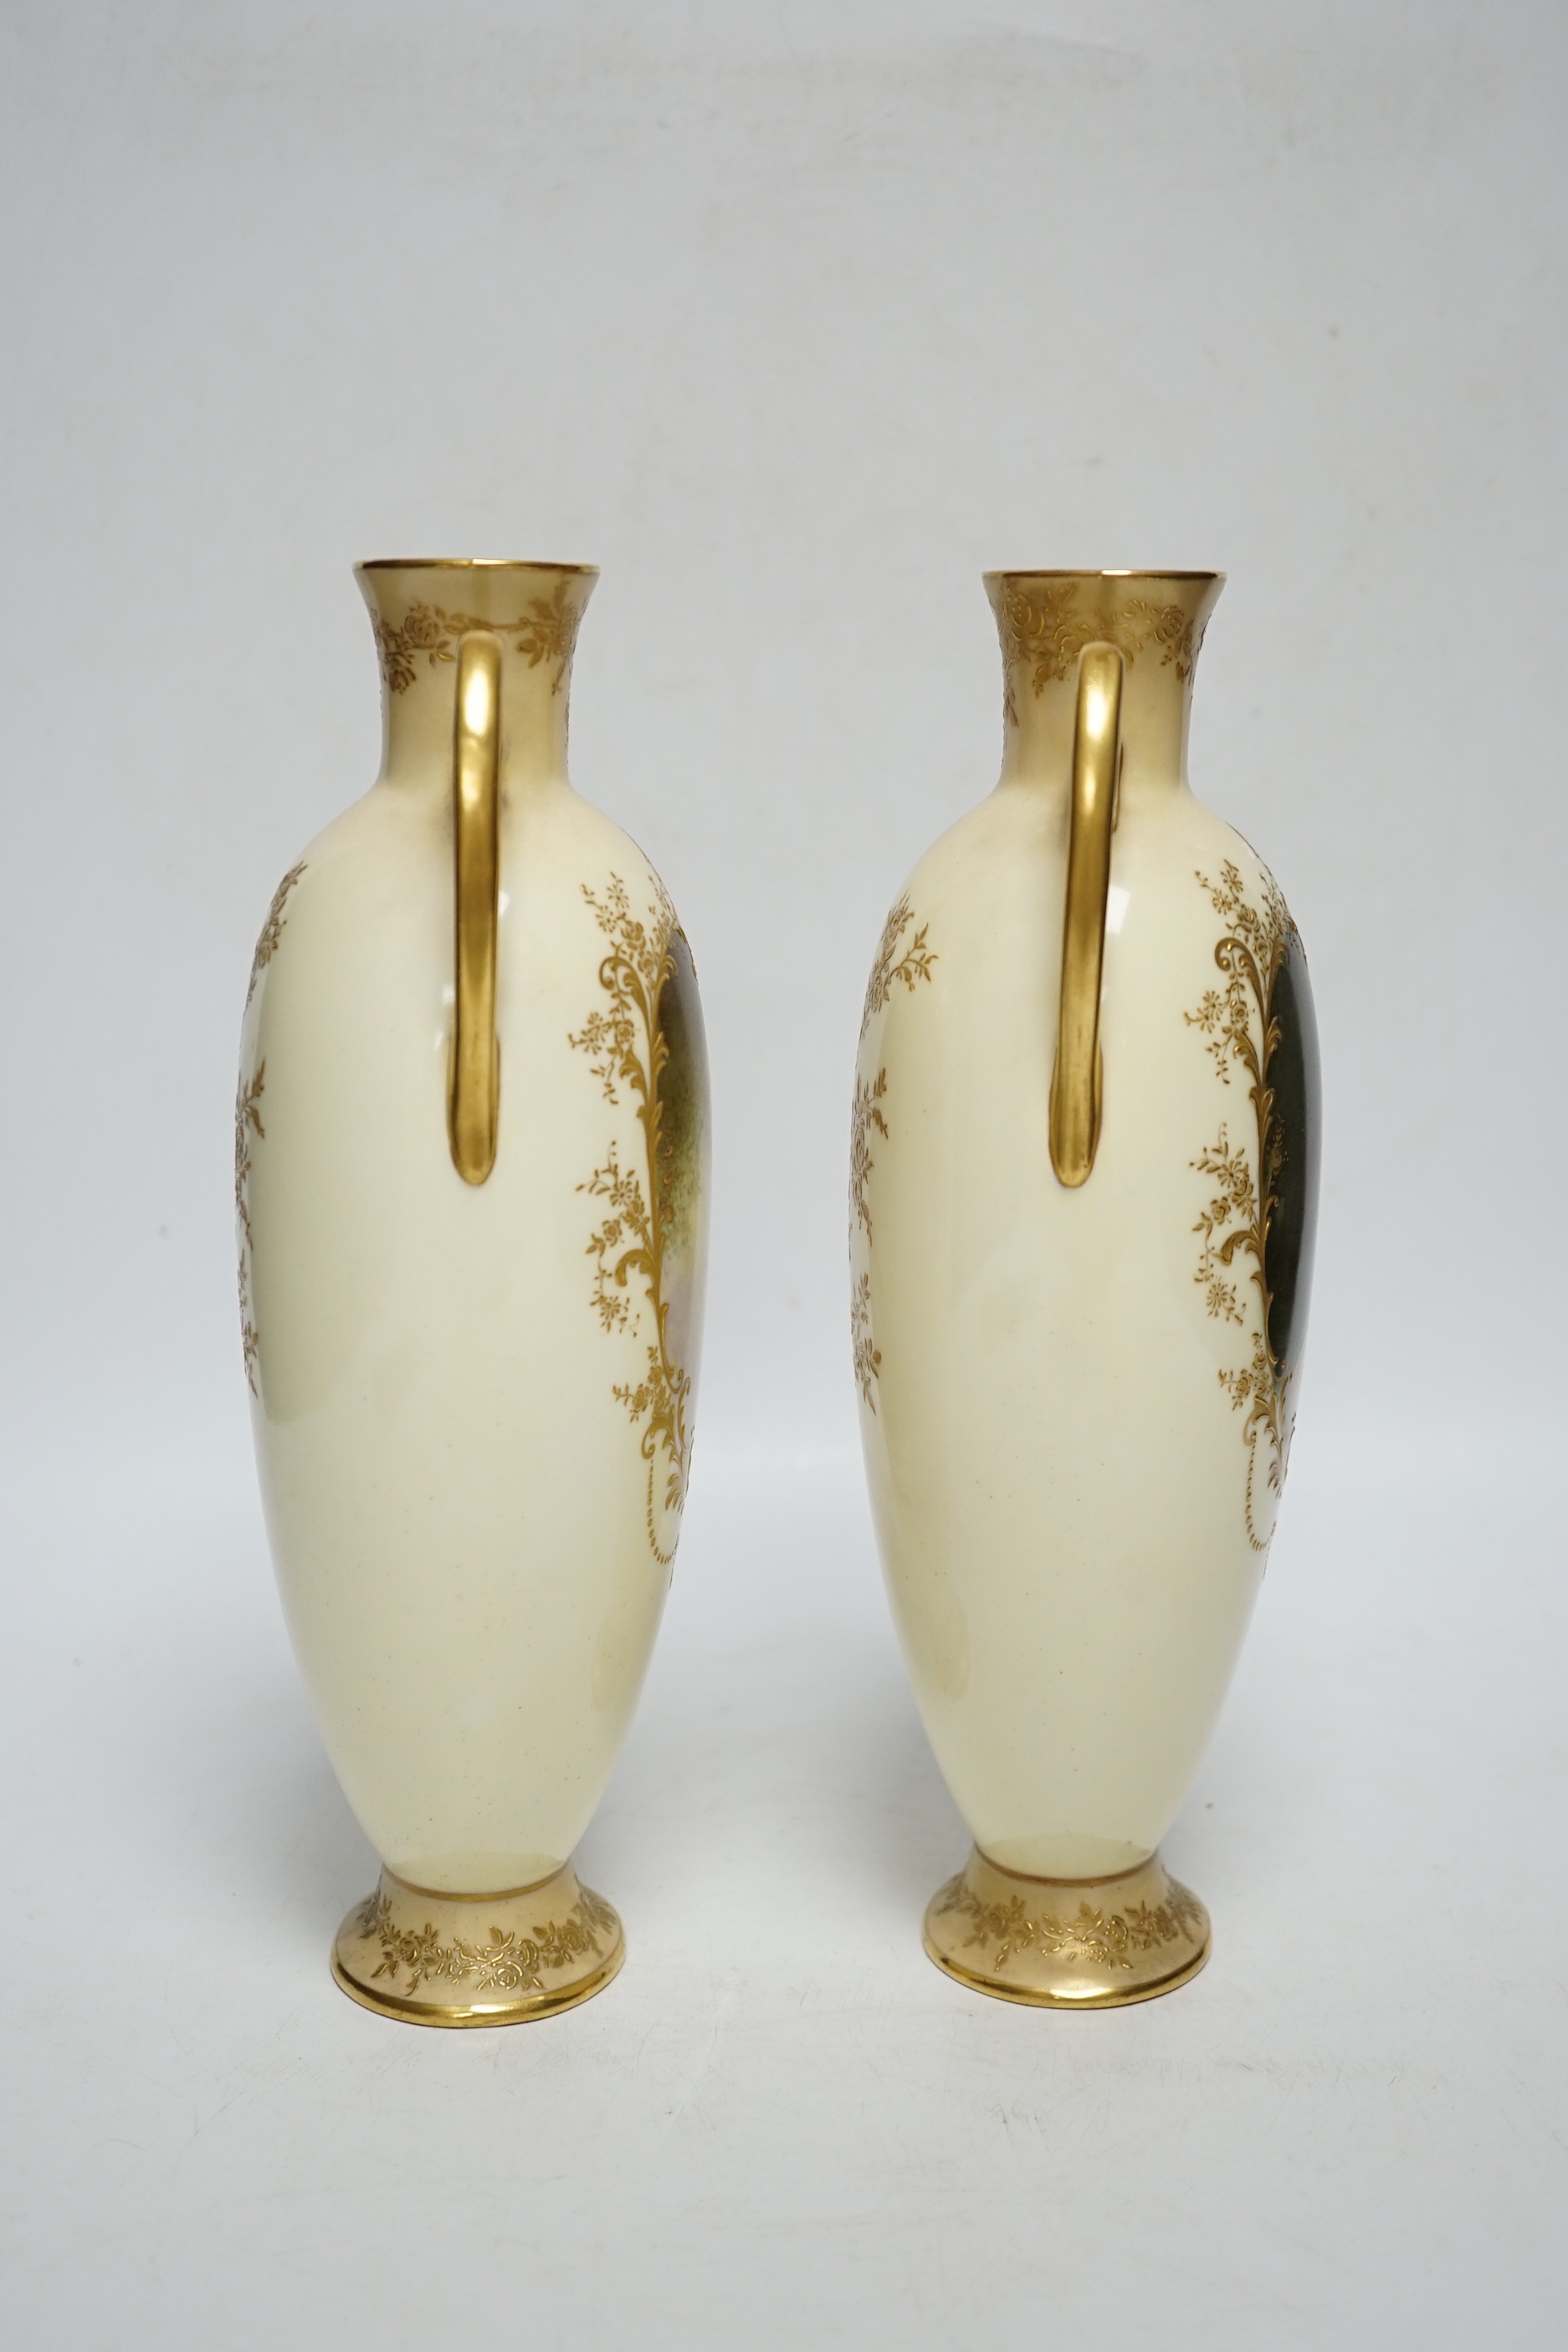 A pair of Royal Doulton vases painted with female portraits, by Henri Boullemier, 25.5cm